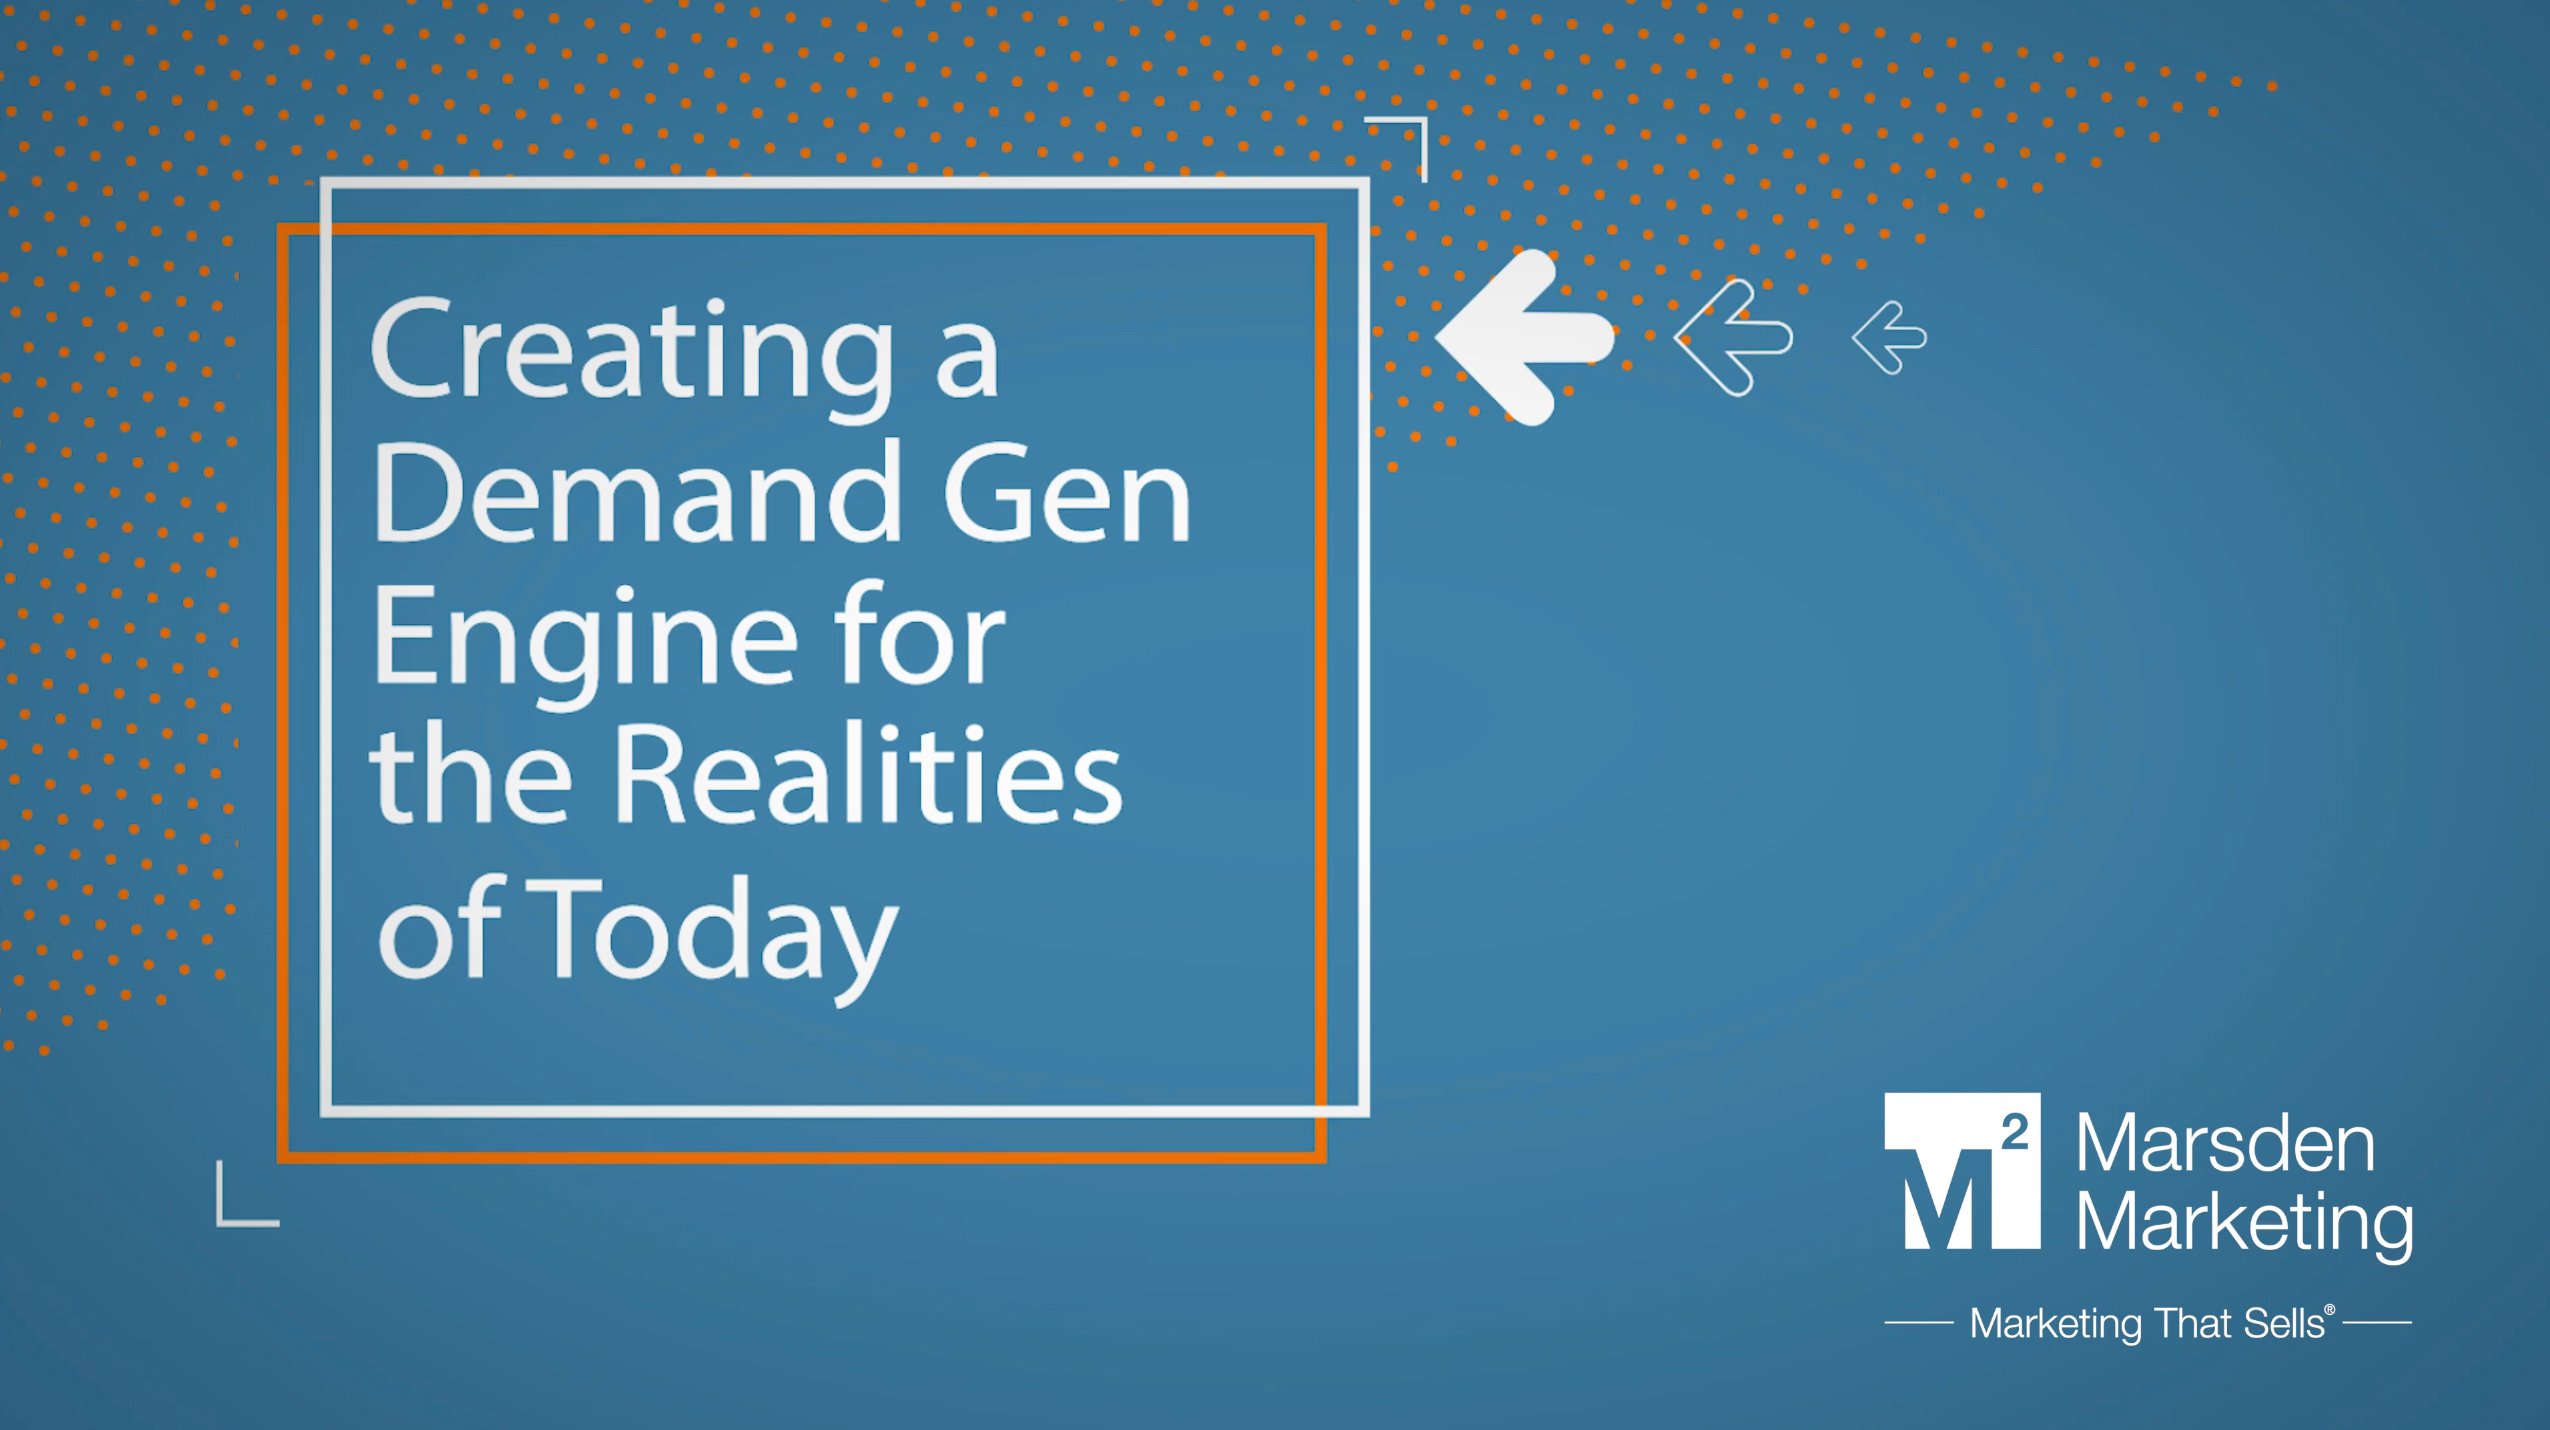 Creating a Demand Gen Engine for the Realities of Today